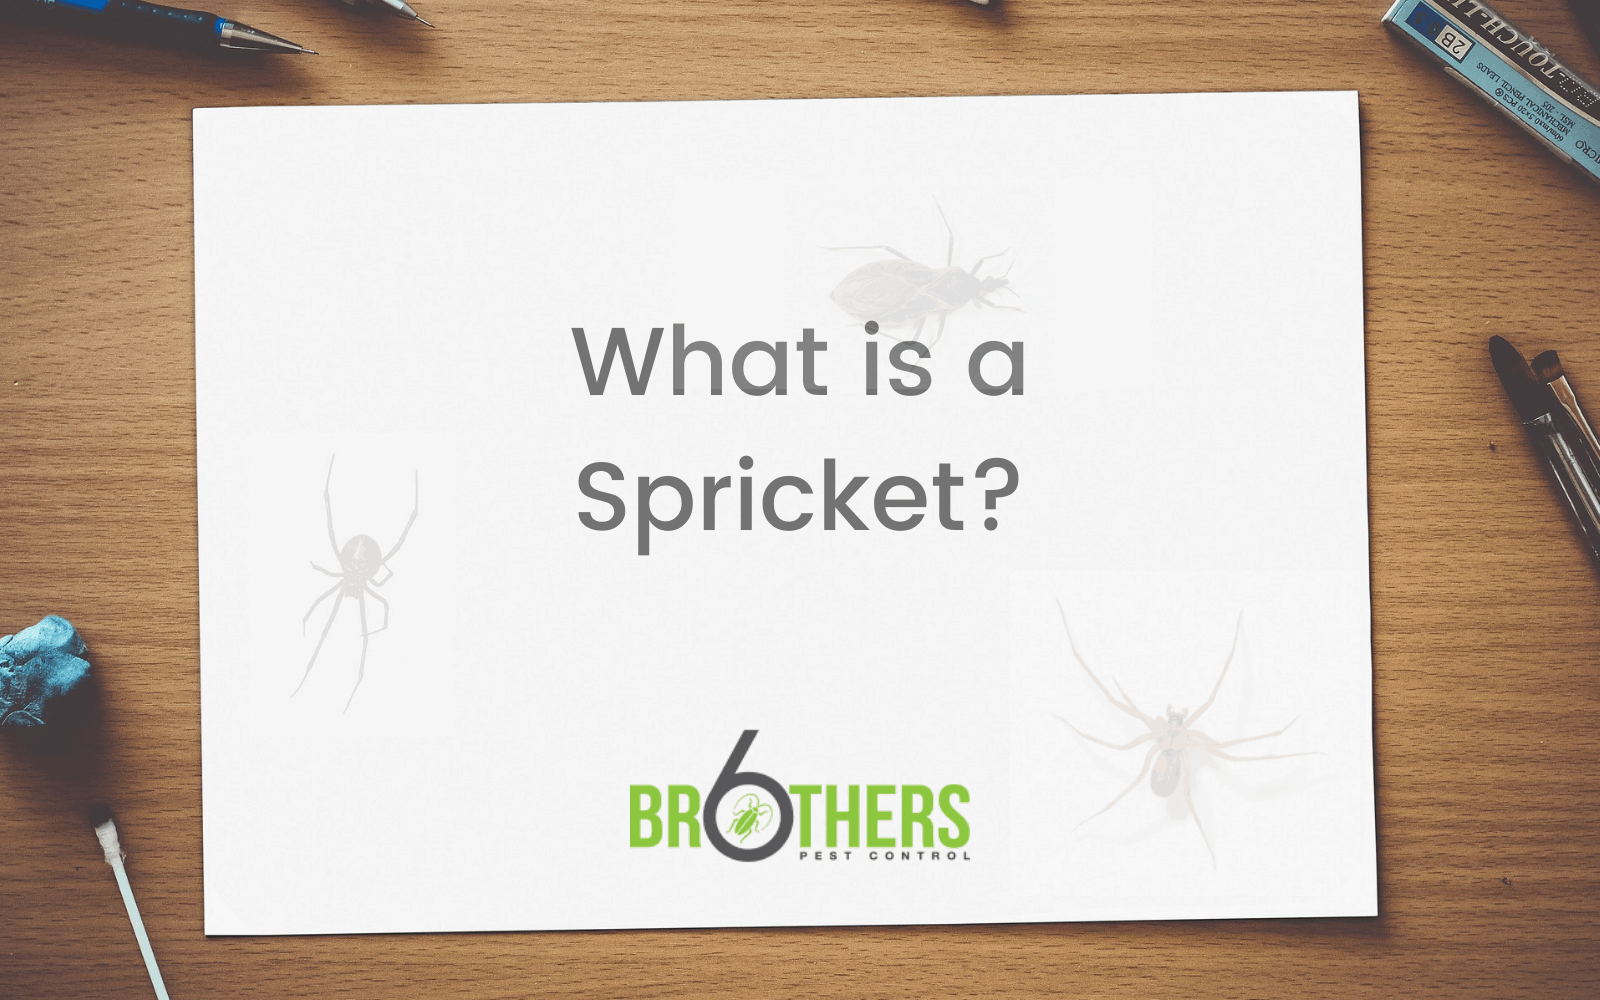 What is a Spricket?